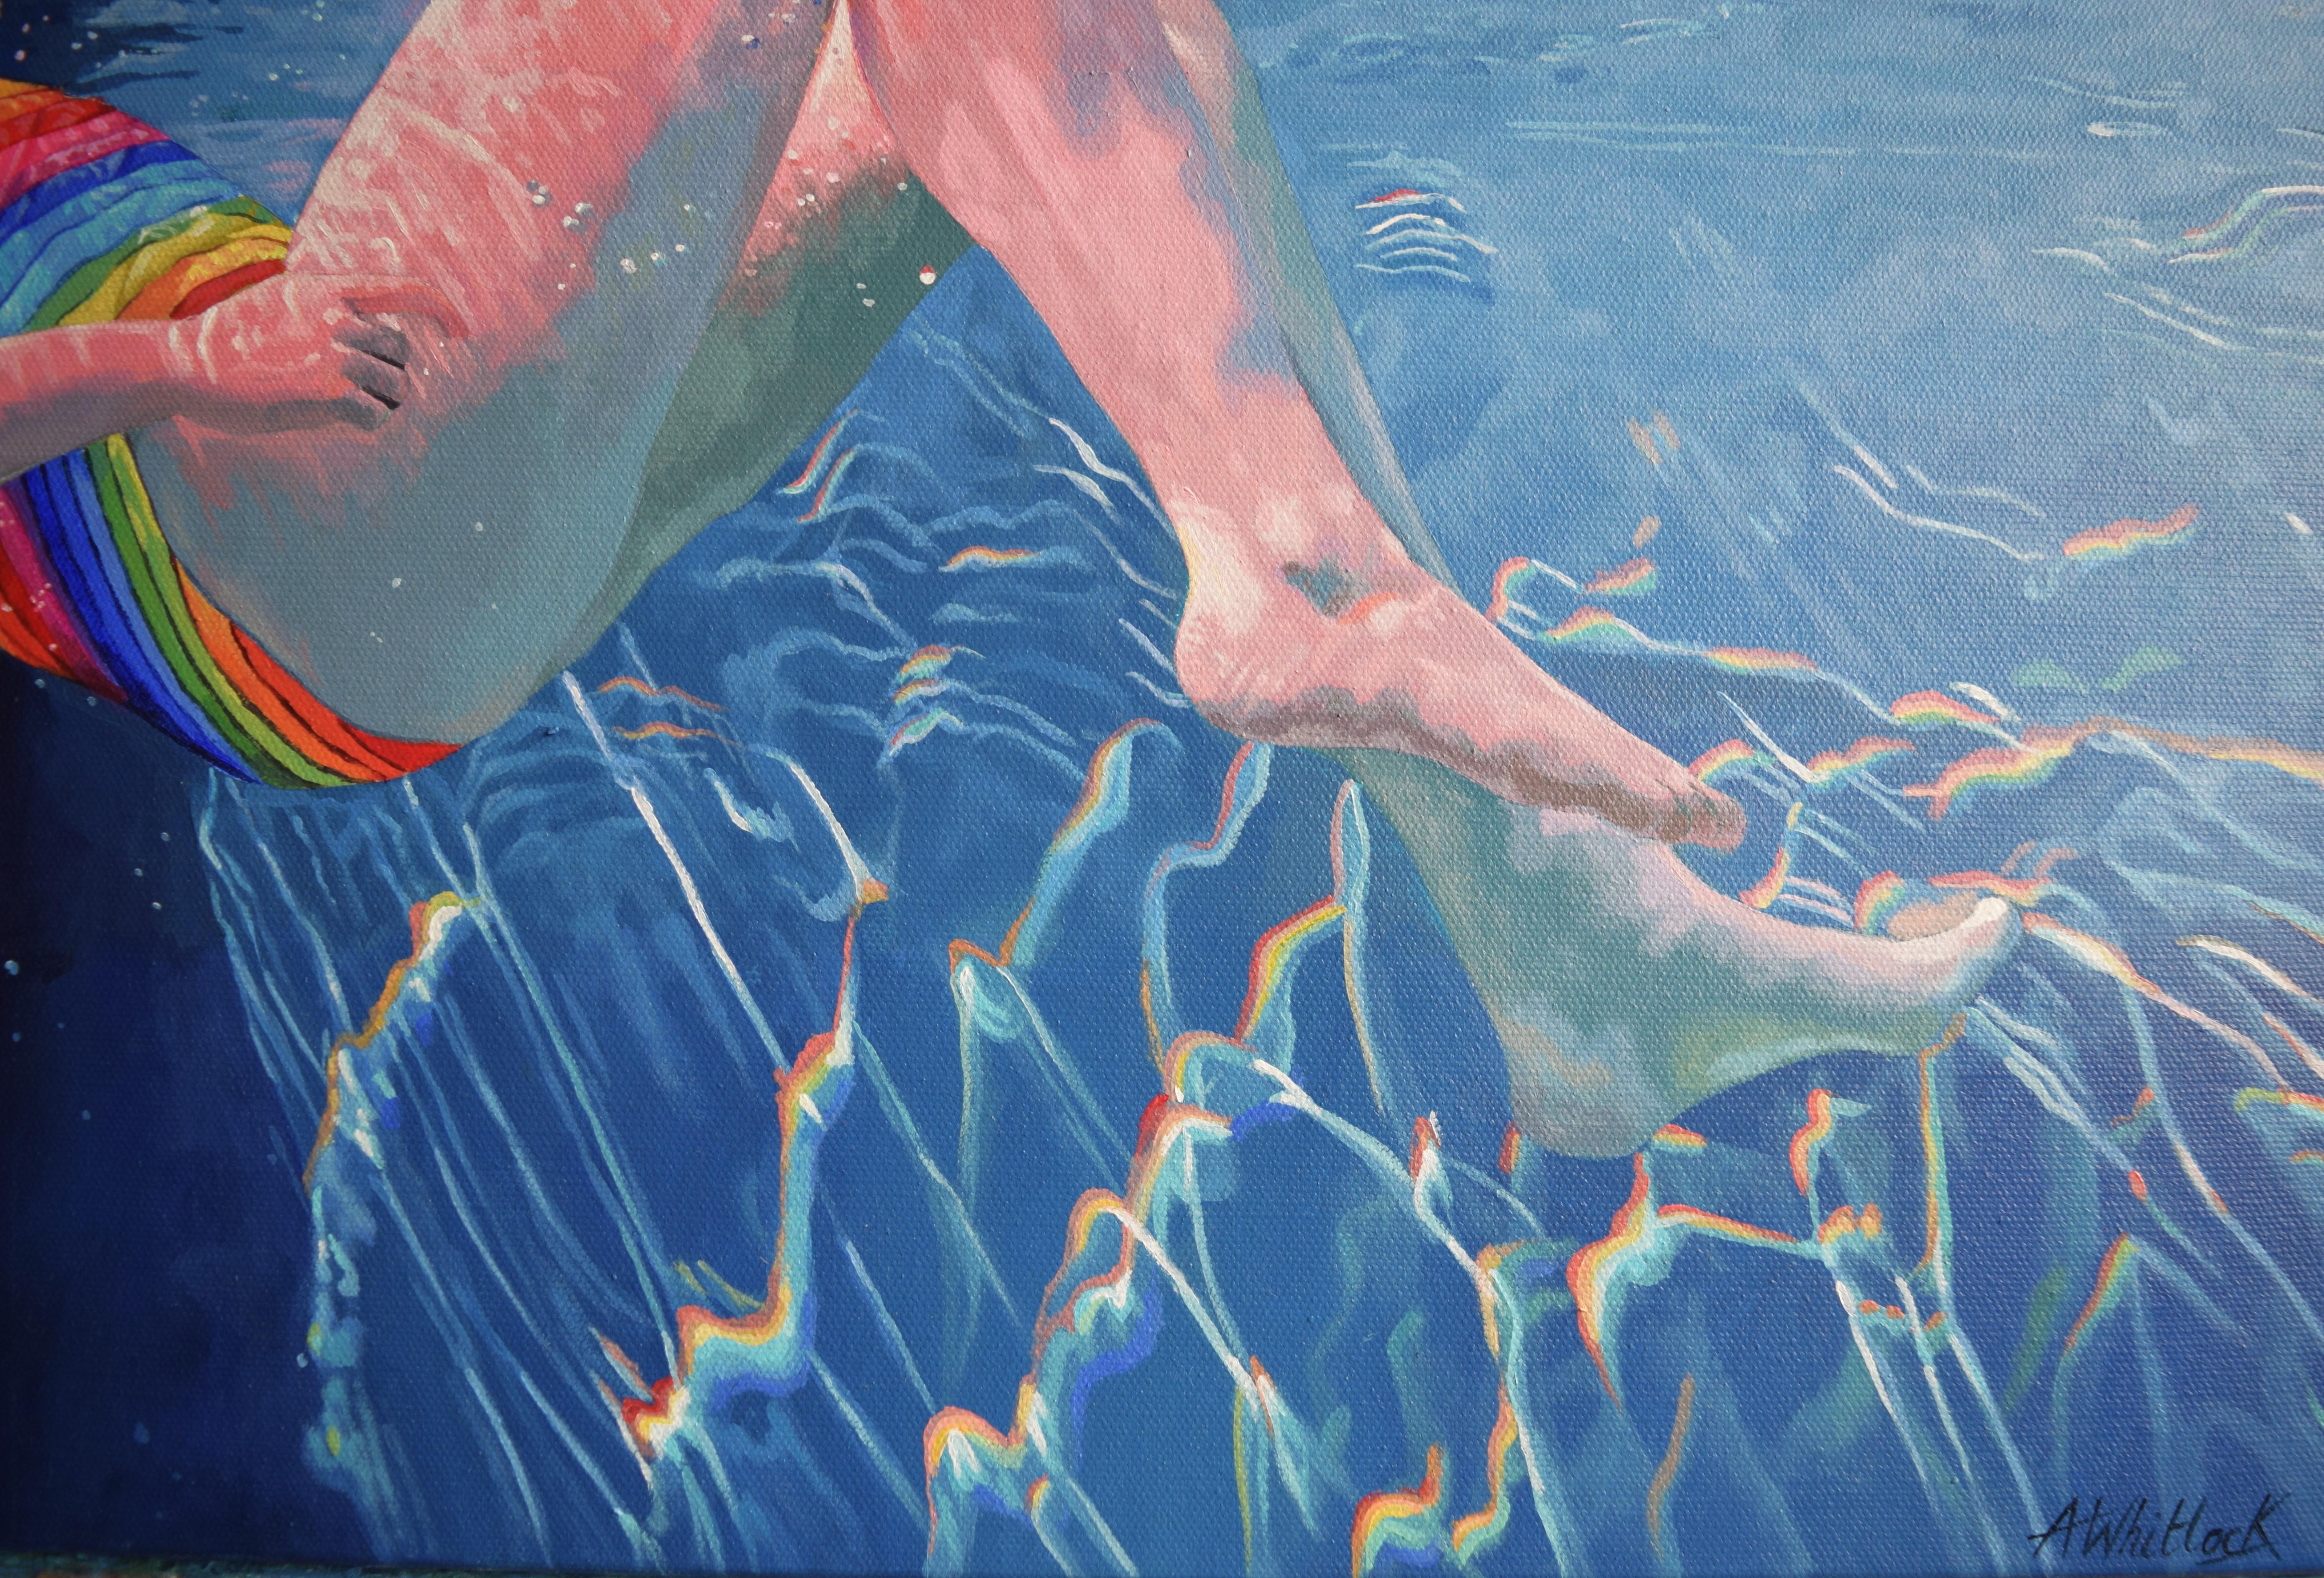 Reverie-original hyperrealistic figurative waterscape painting-contemporary art  - Impressionist Painting by Abi Whitlock